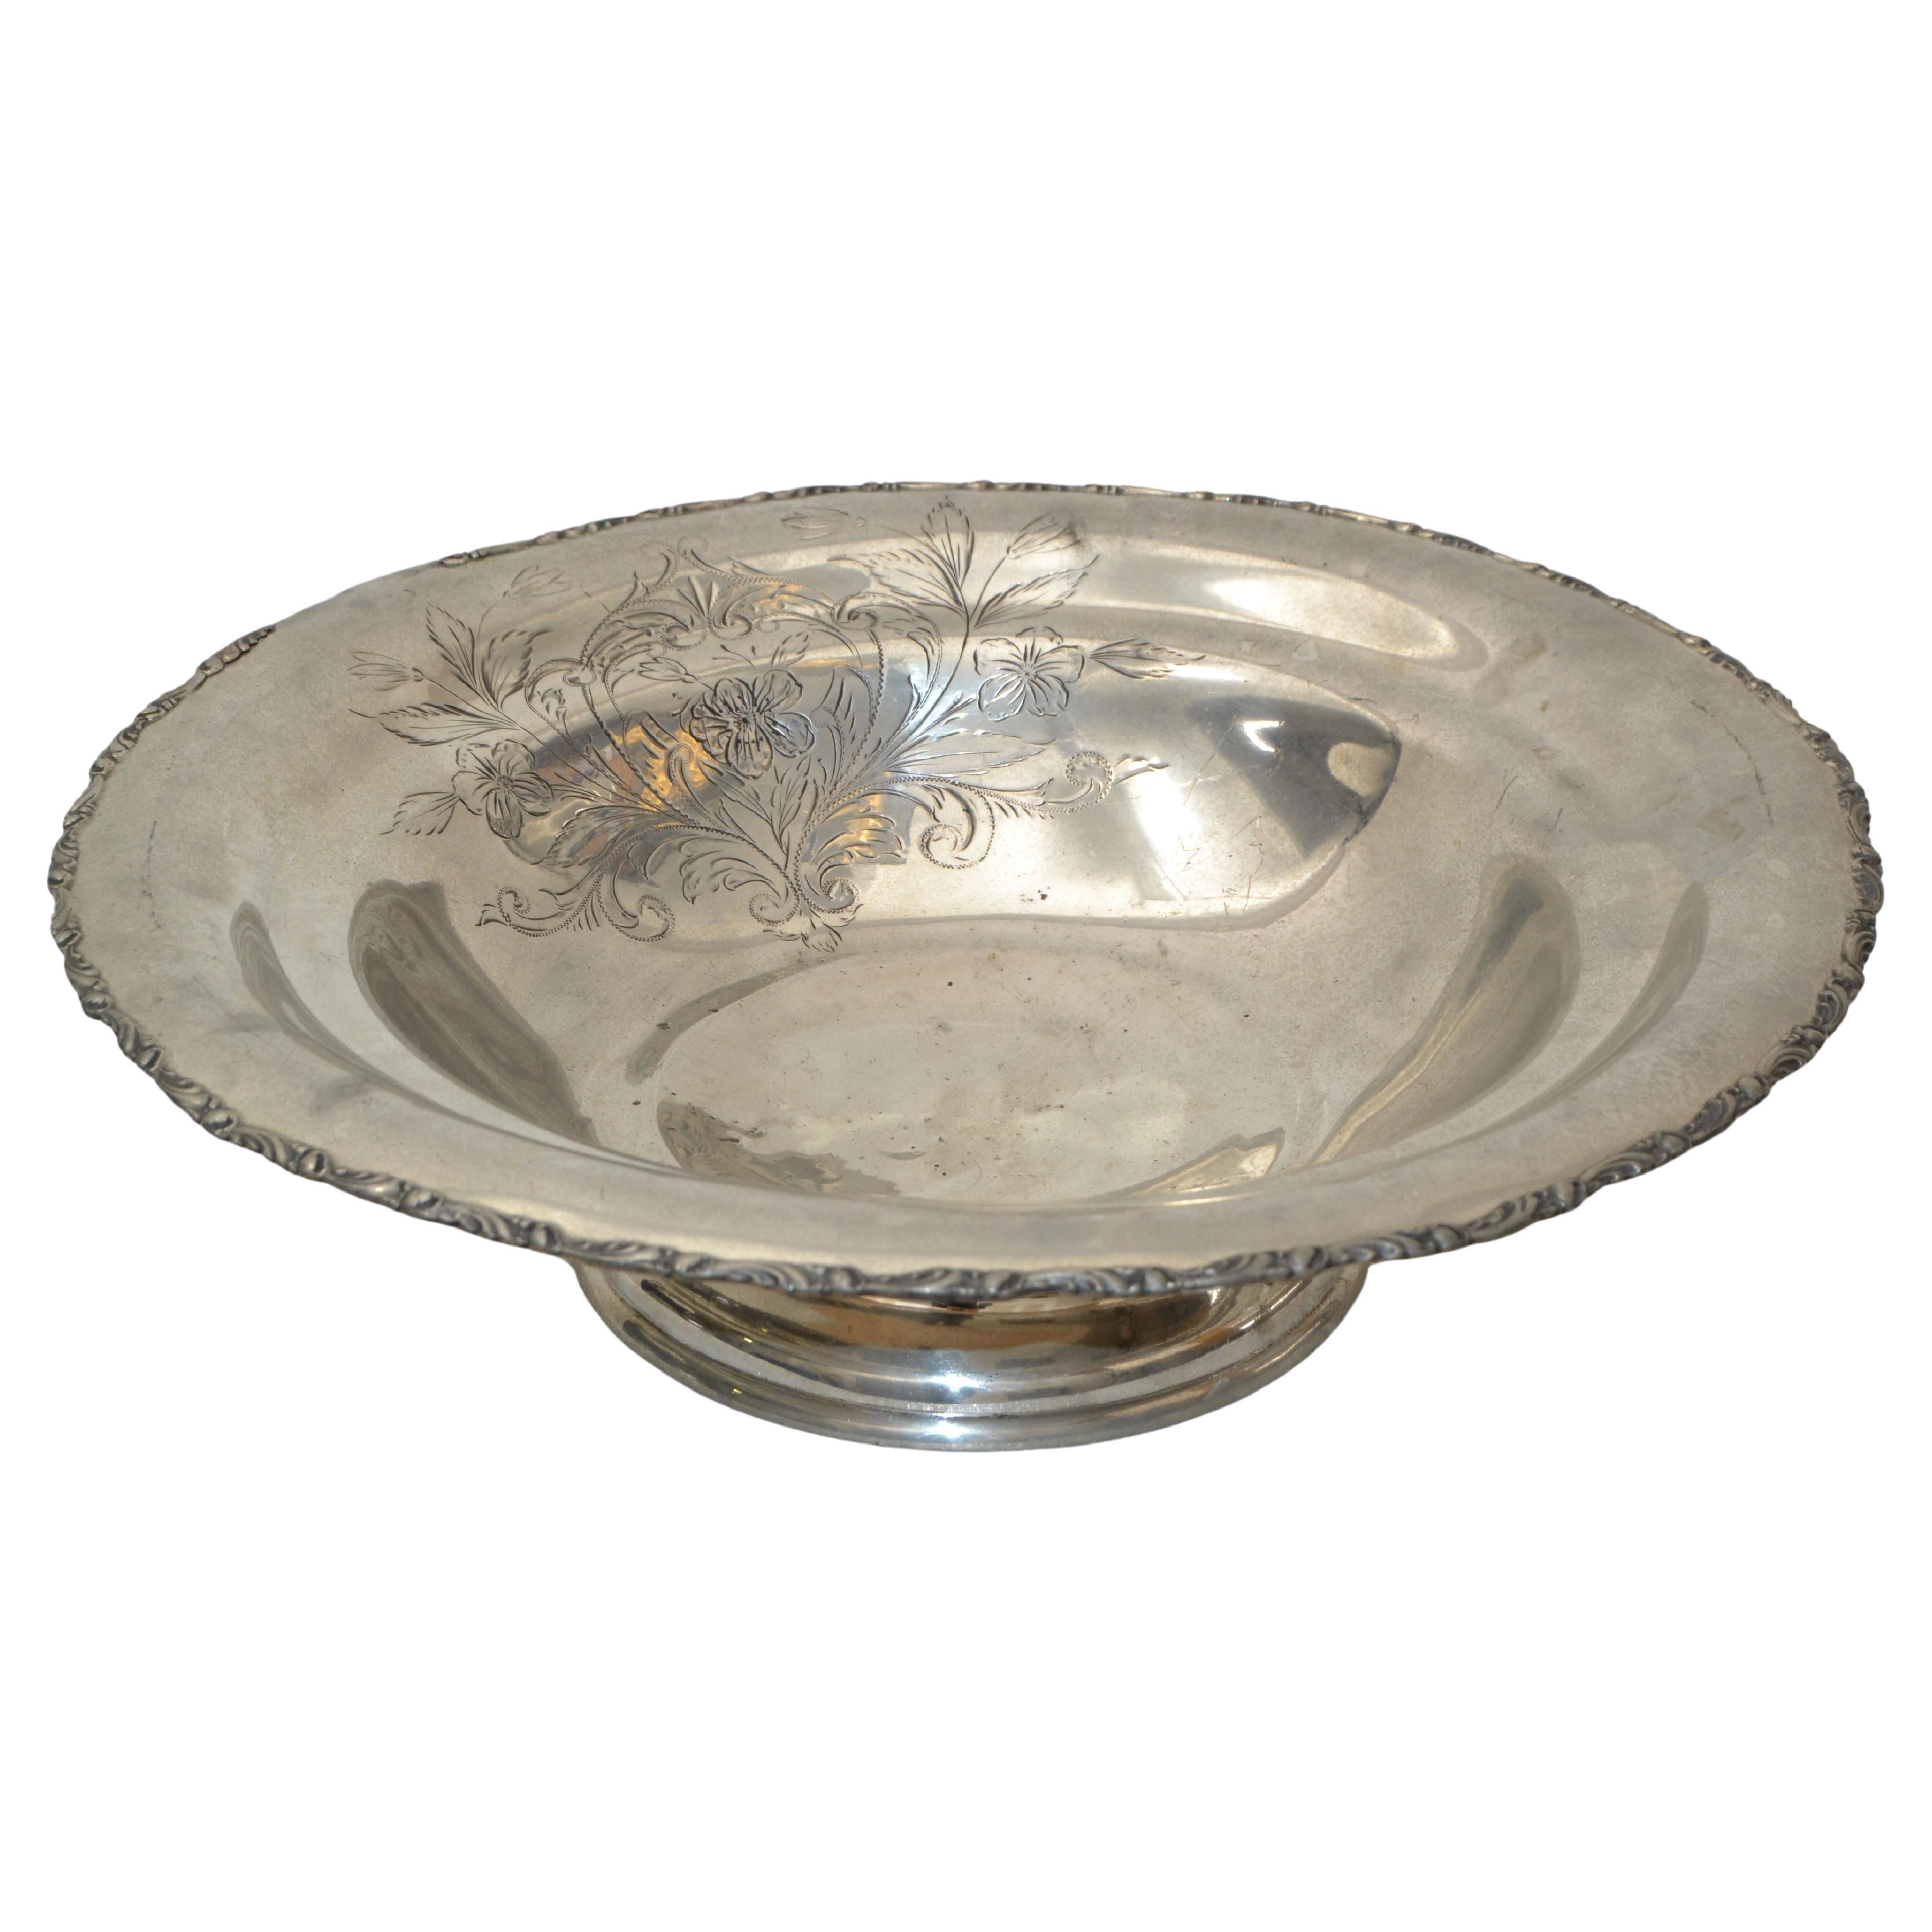 English Silver Plate Trademark Ornate Large Bowl Footed Serving Dish Punch Bowl For Sale